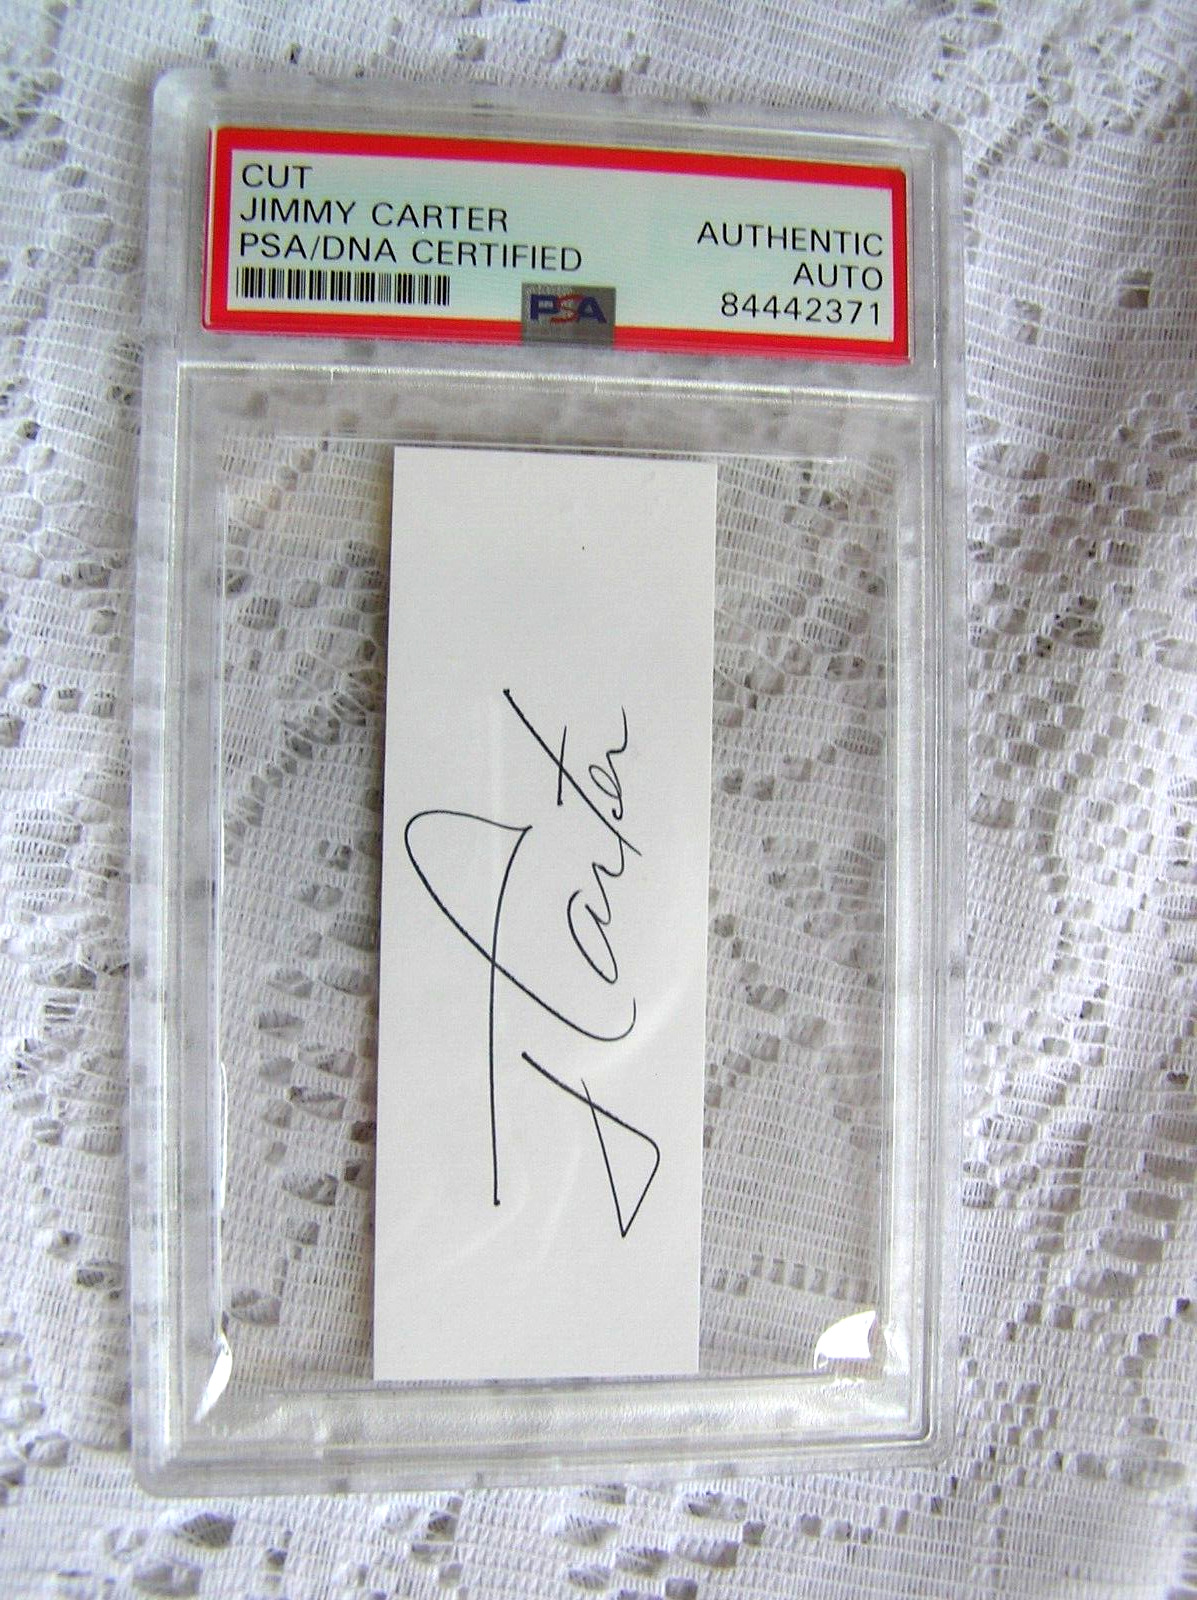 Jimmy Carter President Signed Cut Autograph PSA/DNA Certified Authentic Slabbed